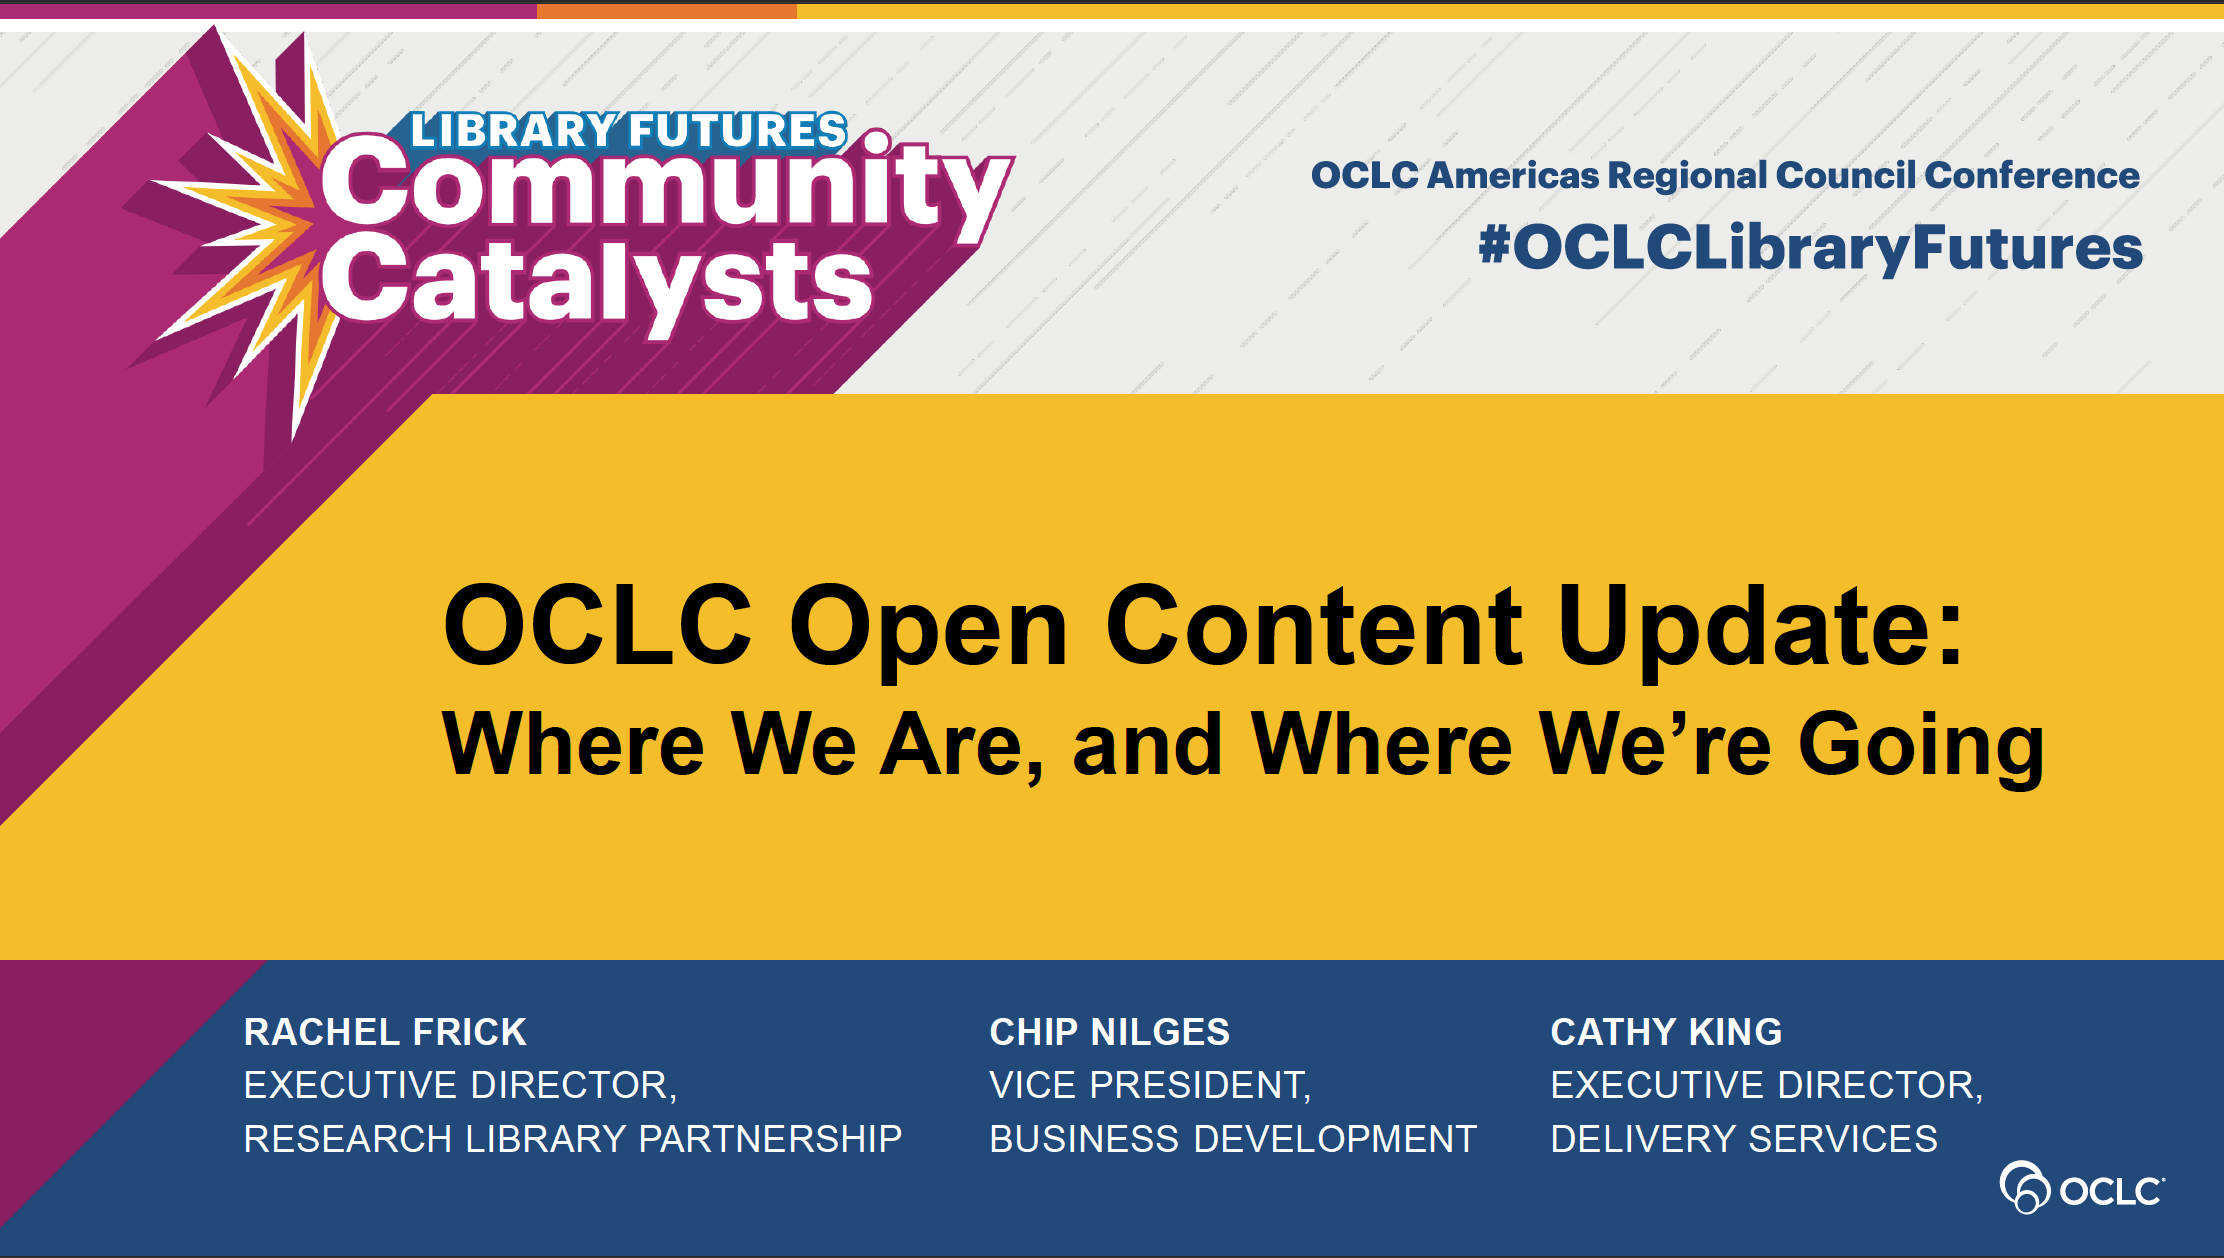 OCLC Open Content Update: Where We Are, and Where We’re Going